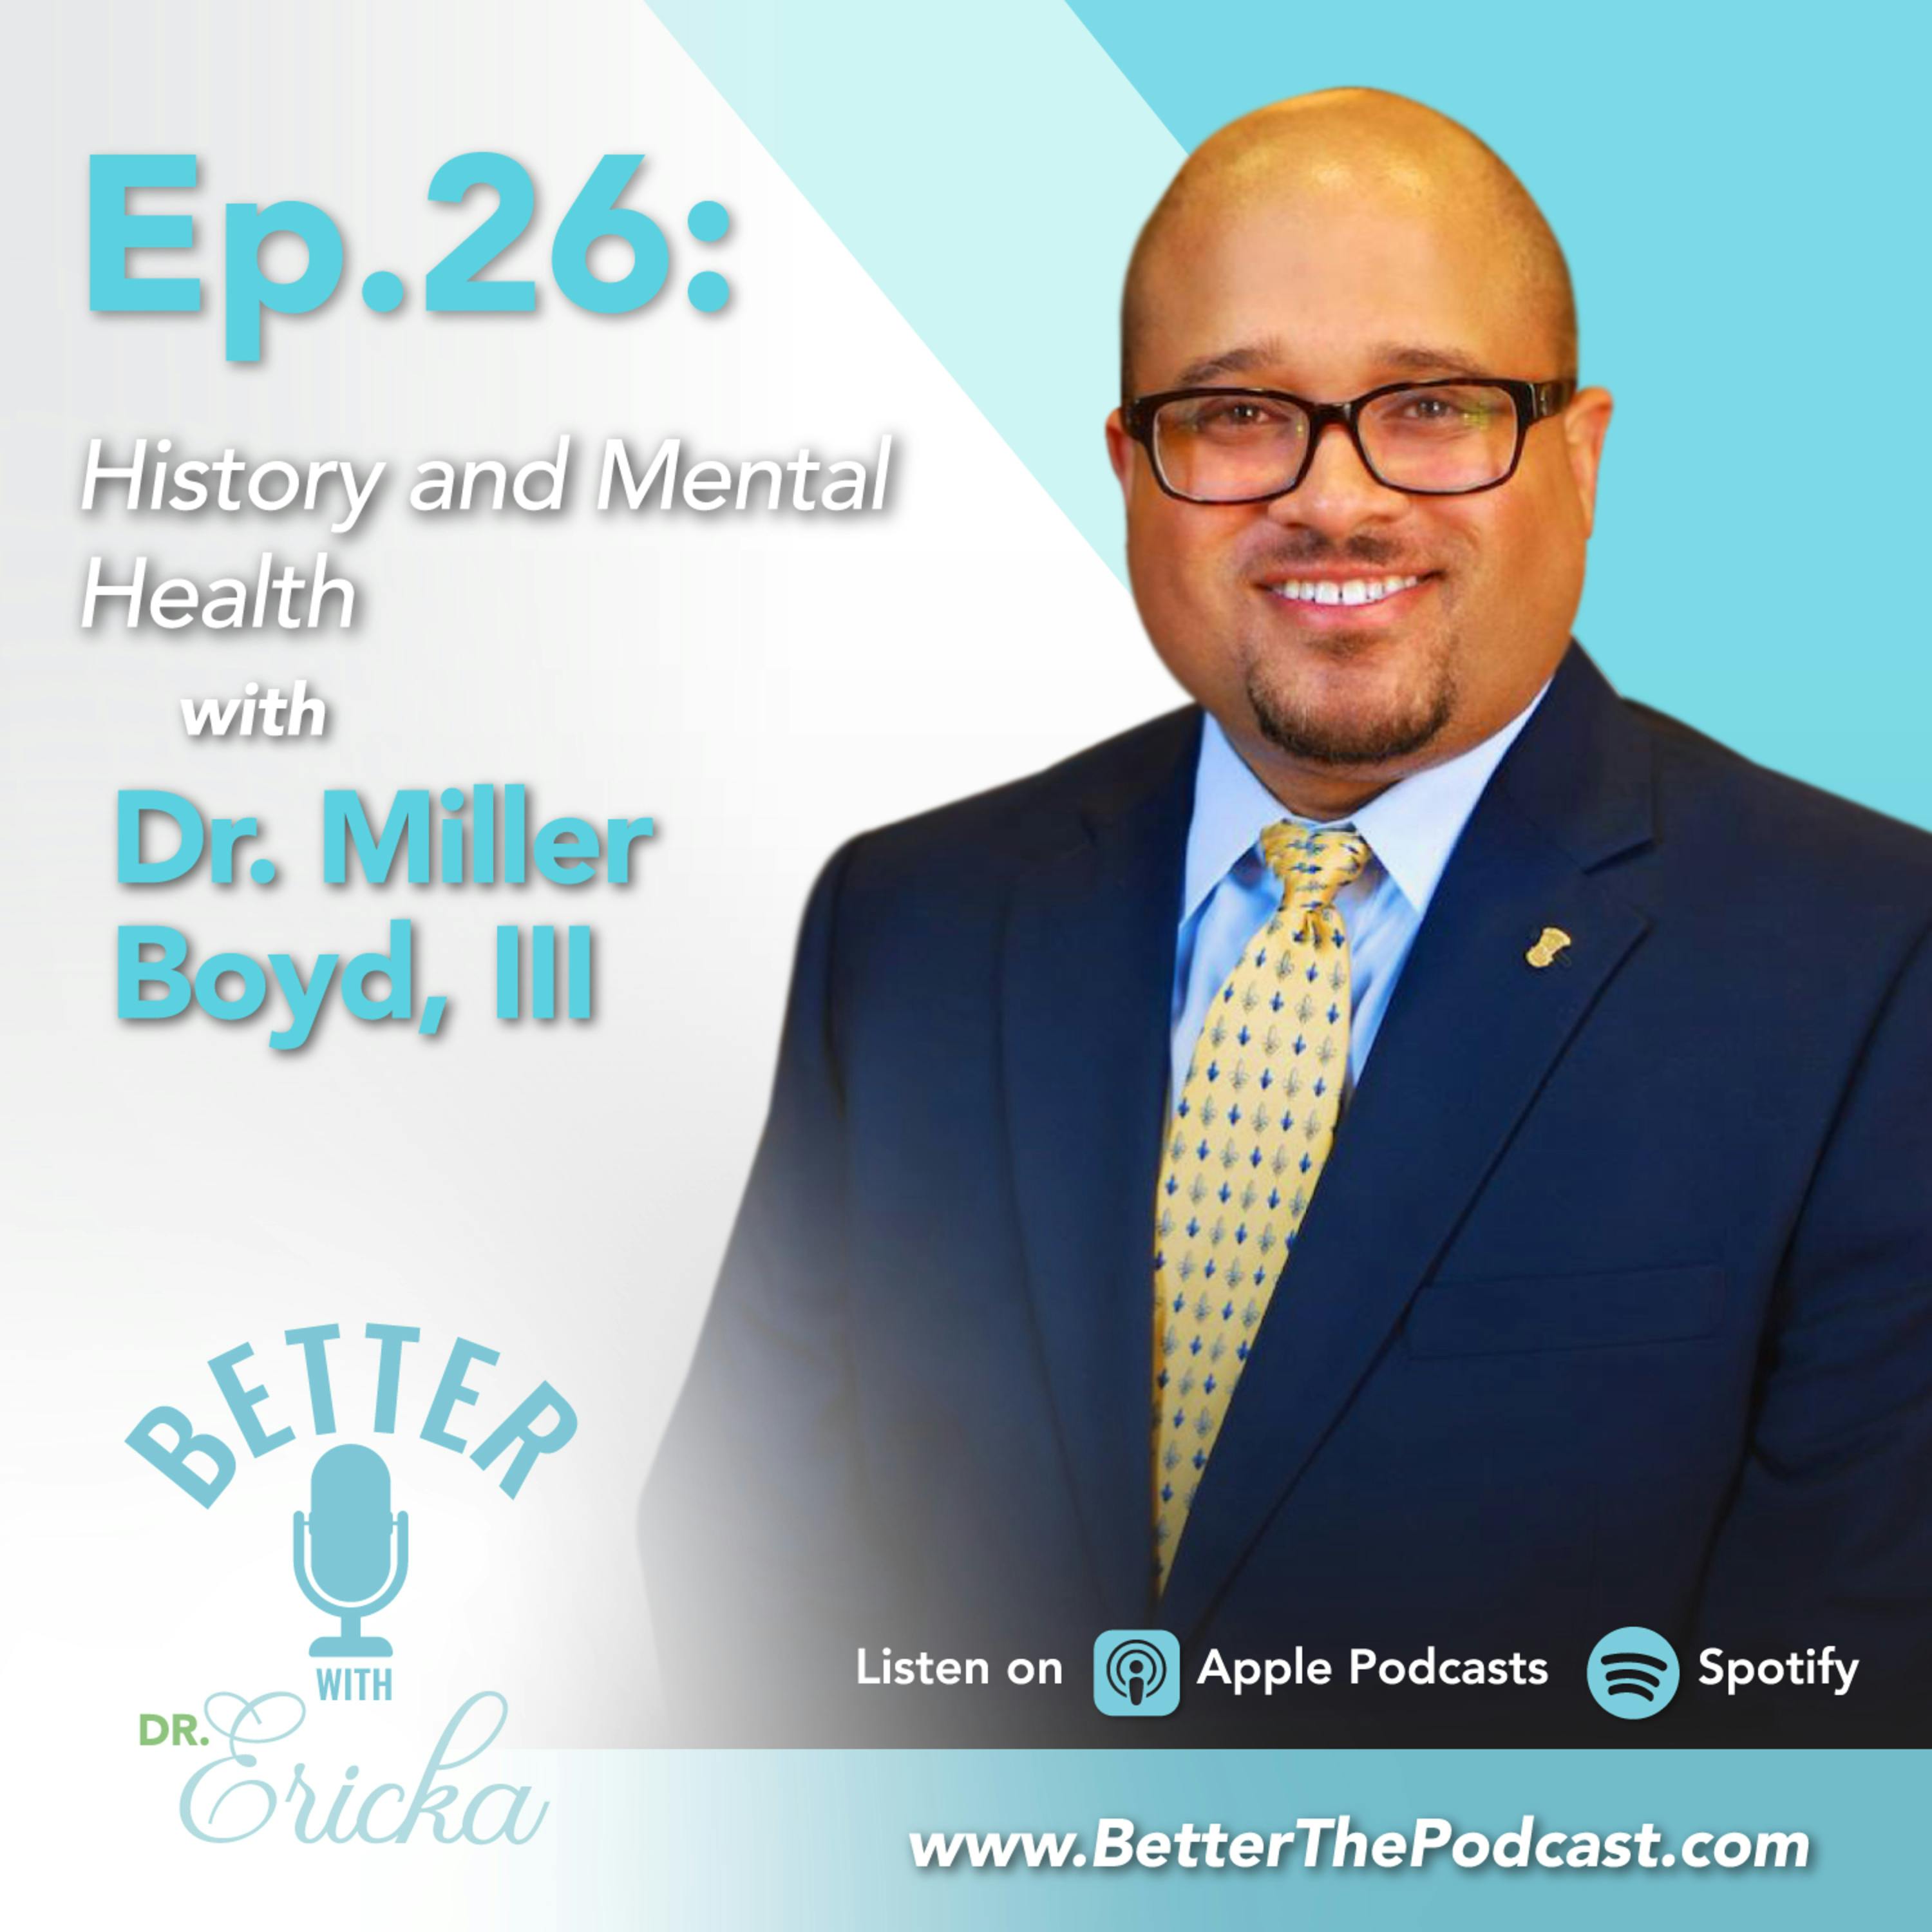 History and Mental Health with Dr. Miller Boyd, III